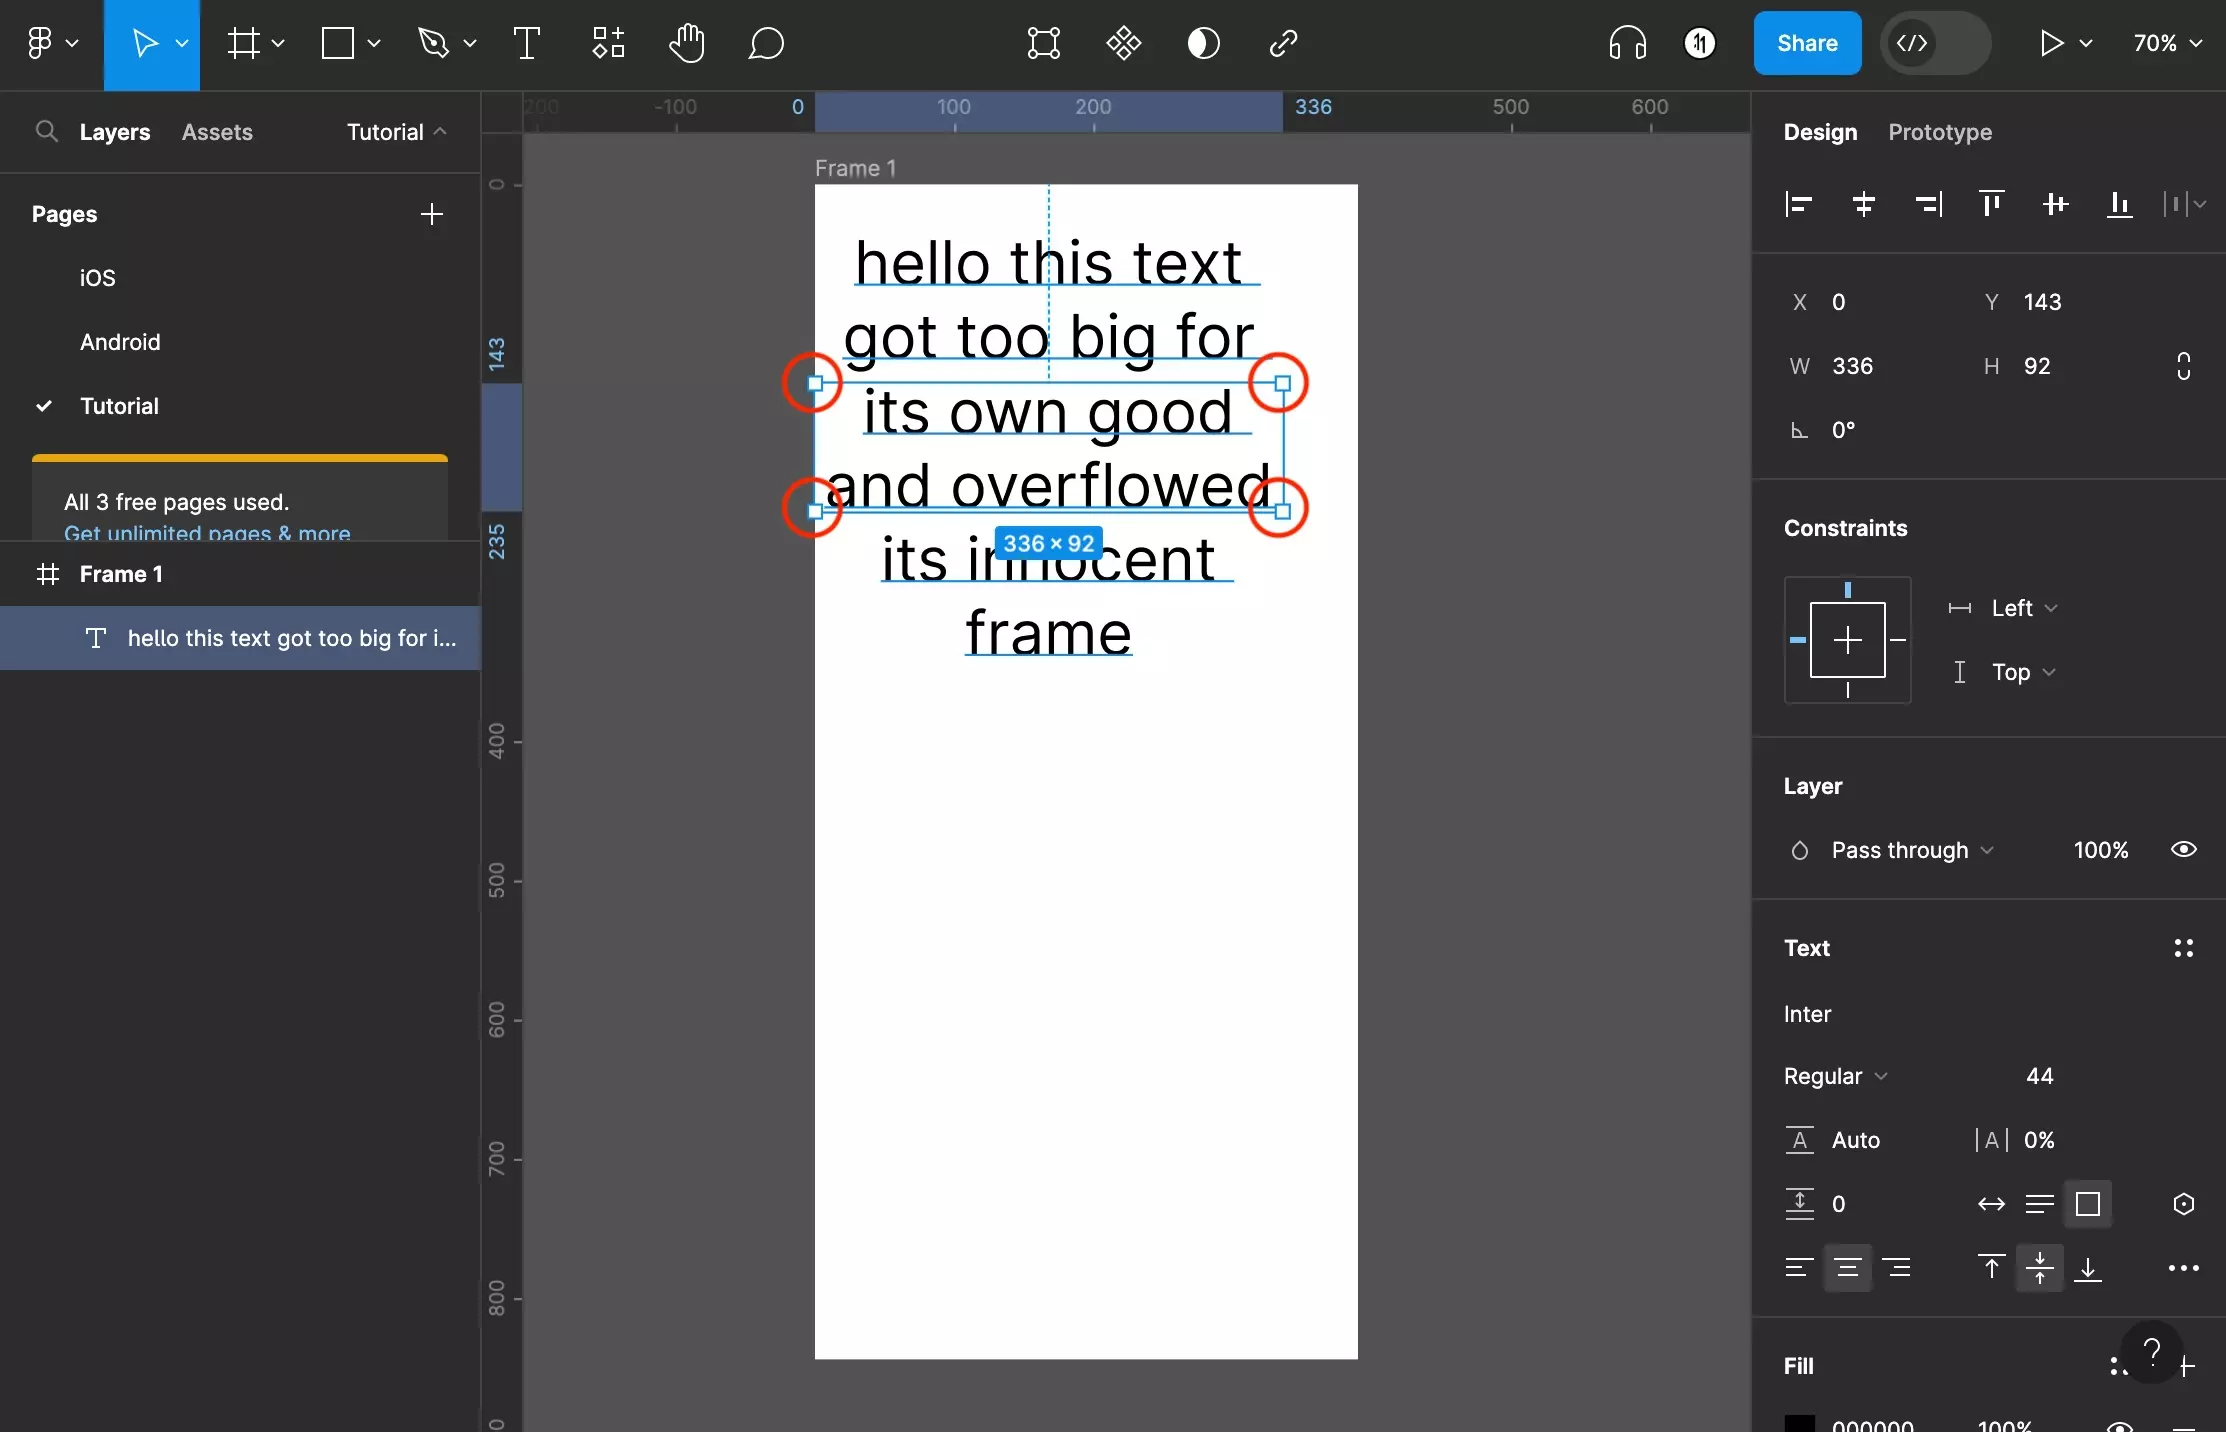 A screenshot of Figma showing the text frame of the prior step. Highlighted are the squares that appear on the edge of the text frame. These are known as handles and allow you to resize the frame by clicking and dragging them to a new location that adapts the frames area.